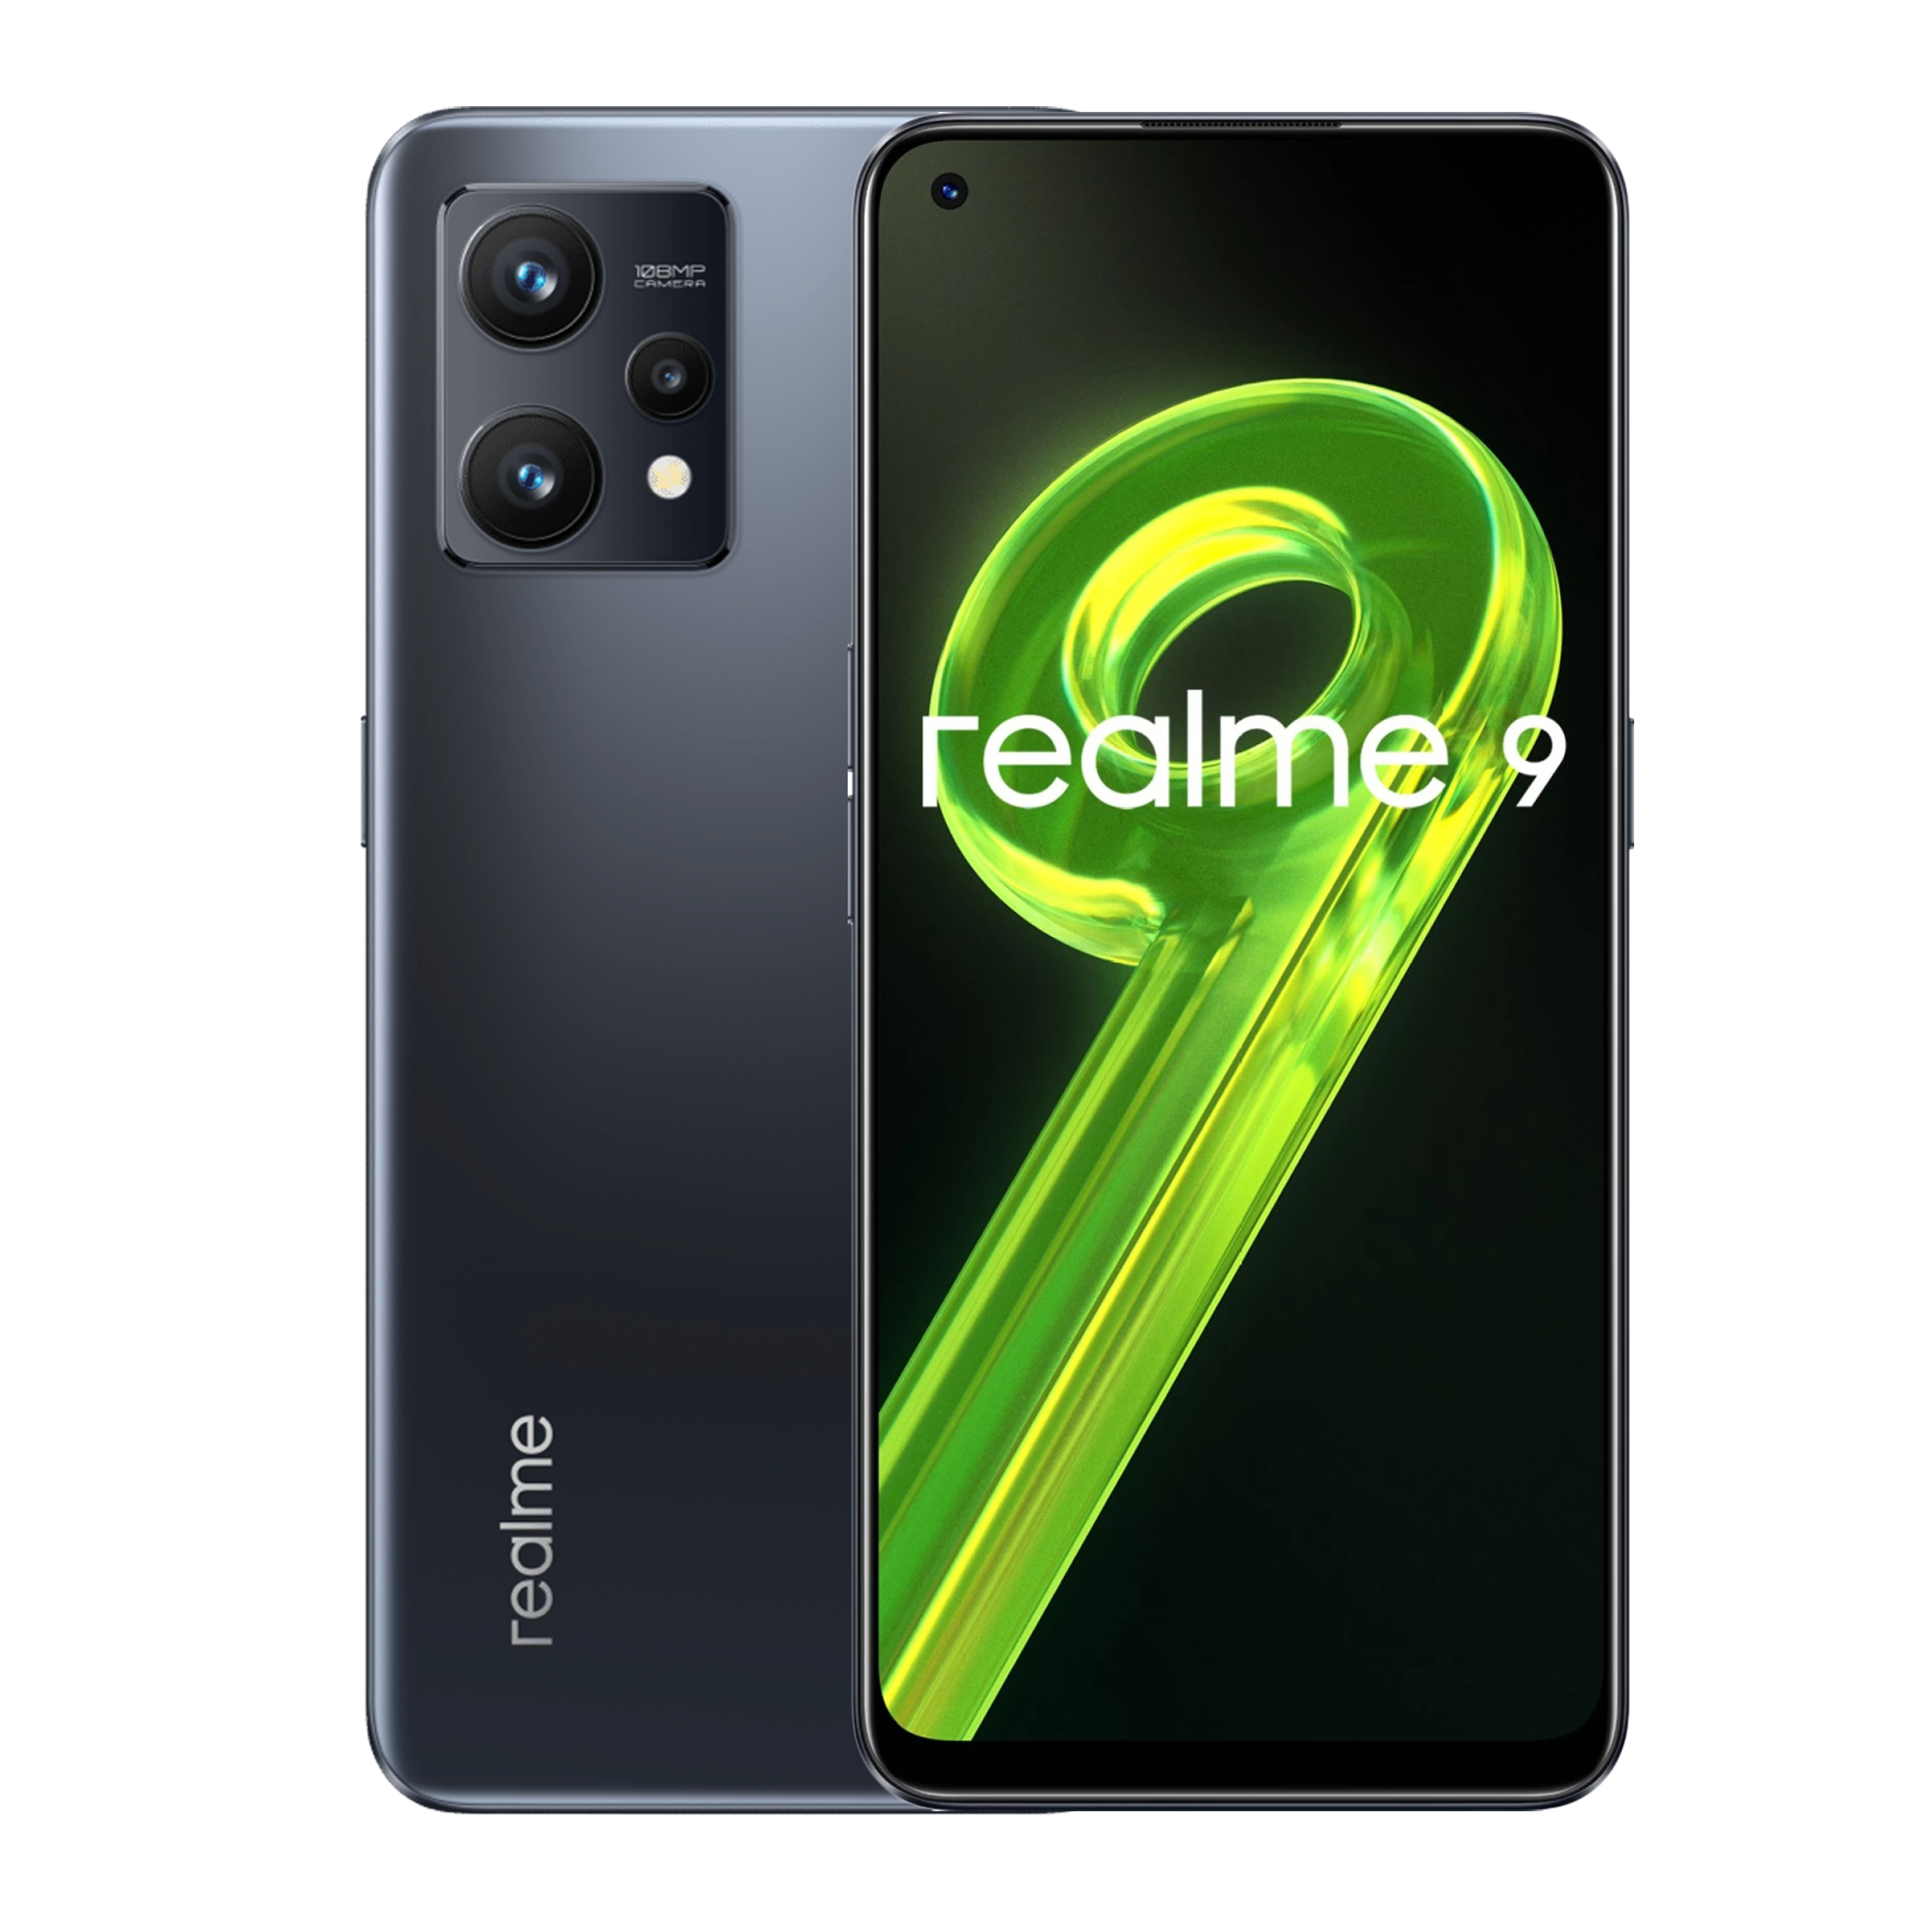 RealMe 9 Pro 5G (5000 mAh Battery, 128 GB Storage) Price and features